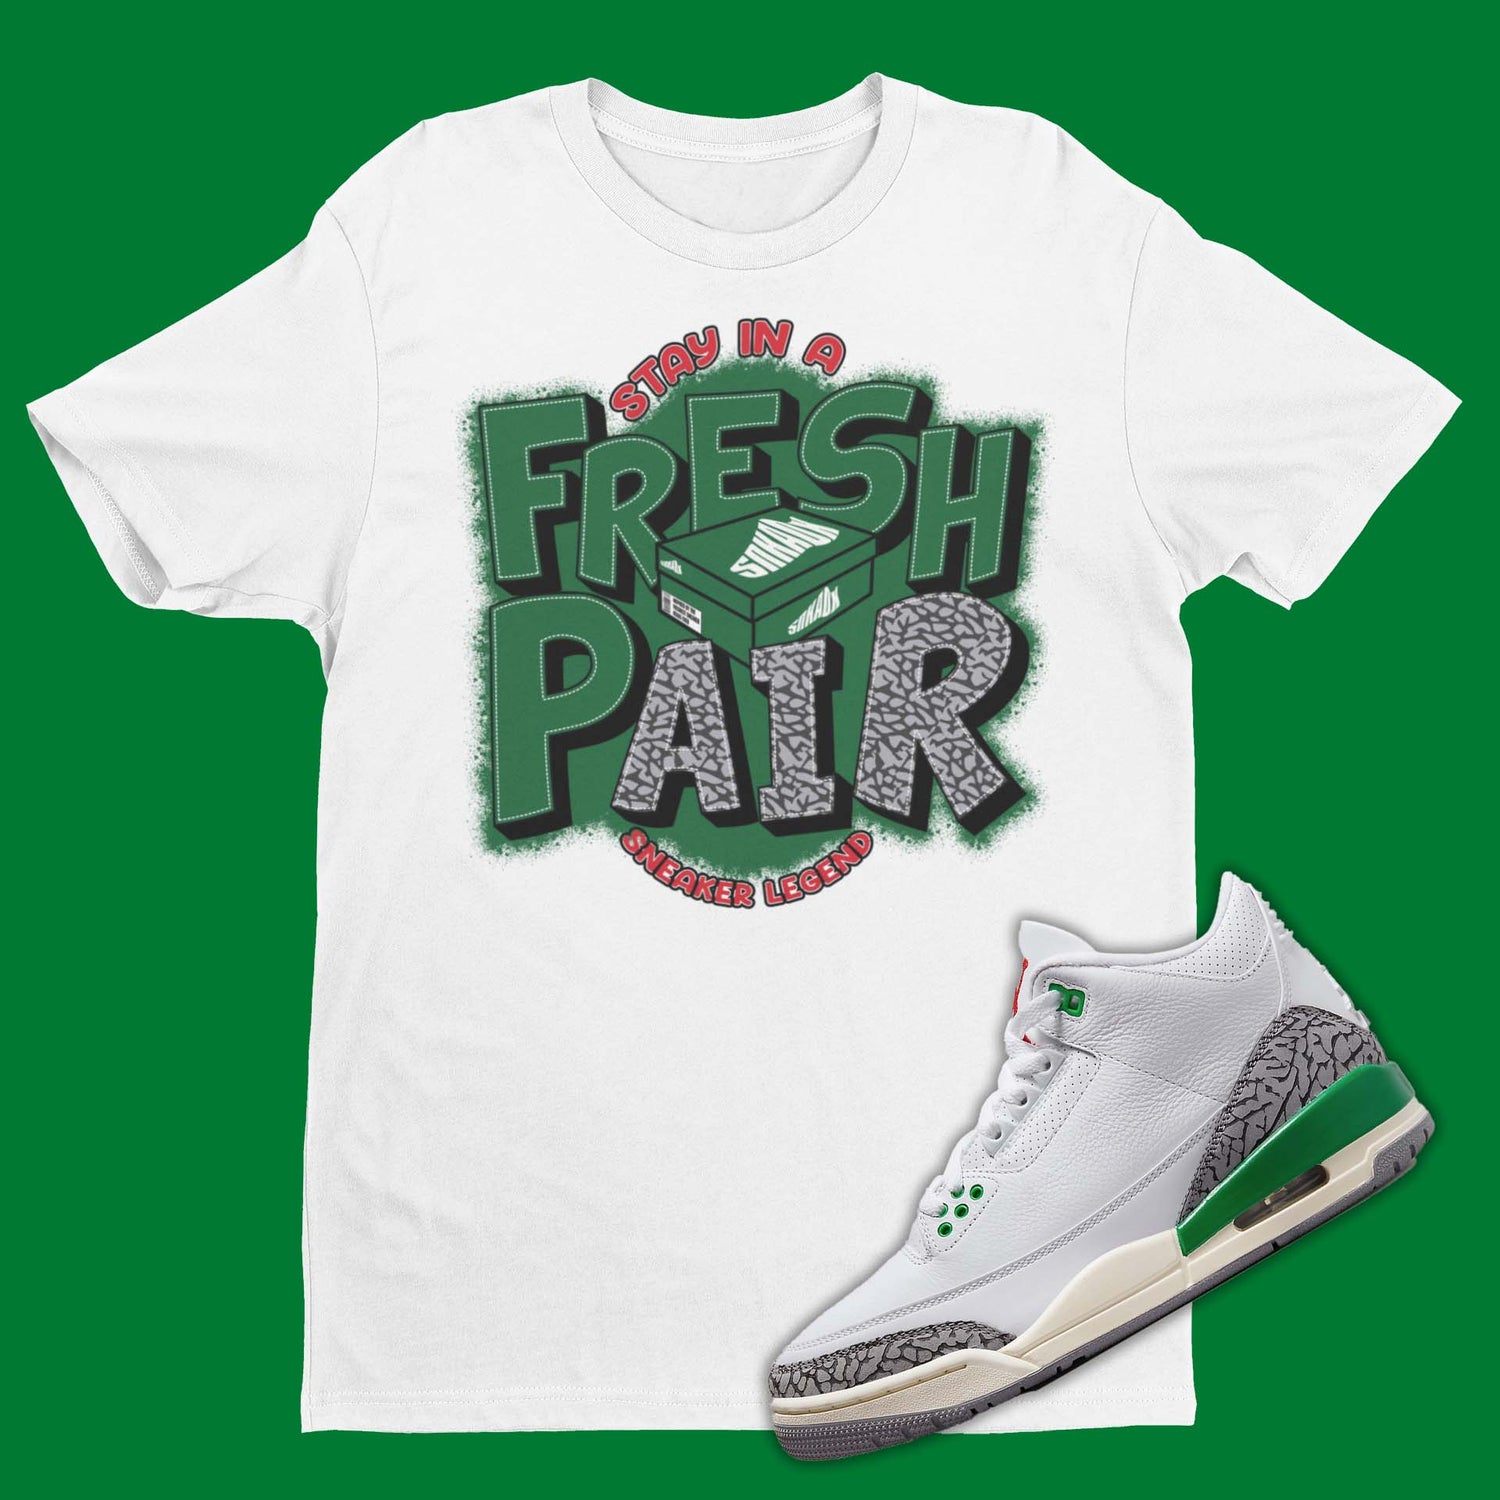 air jordan 3 lucky green matching shirt with Fresh Pair and a show box on the front.